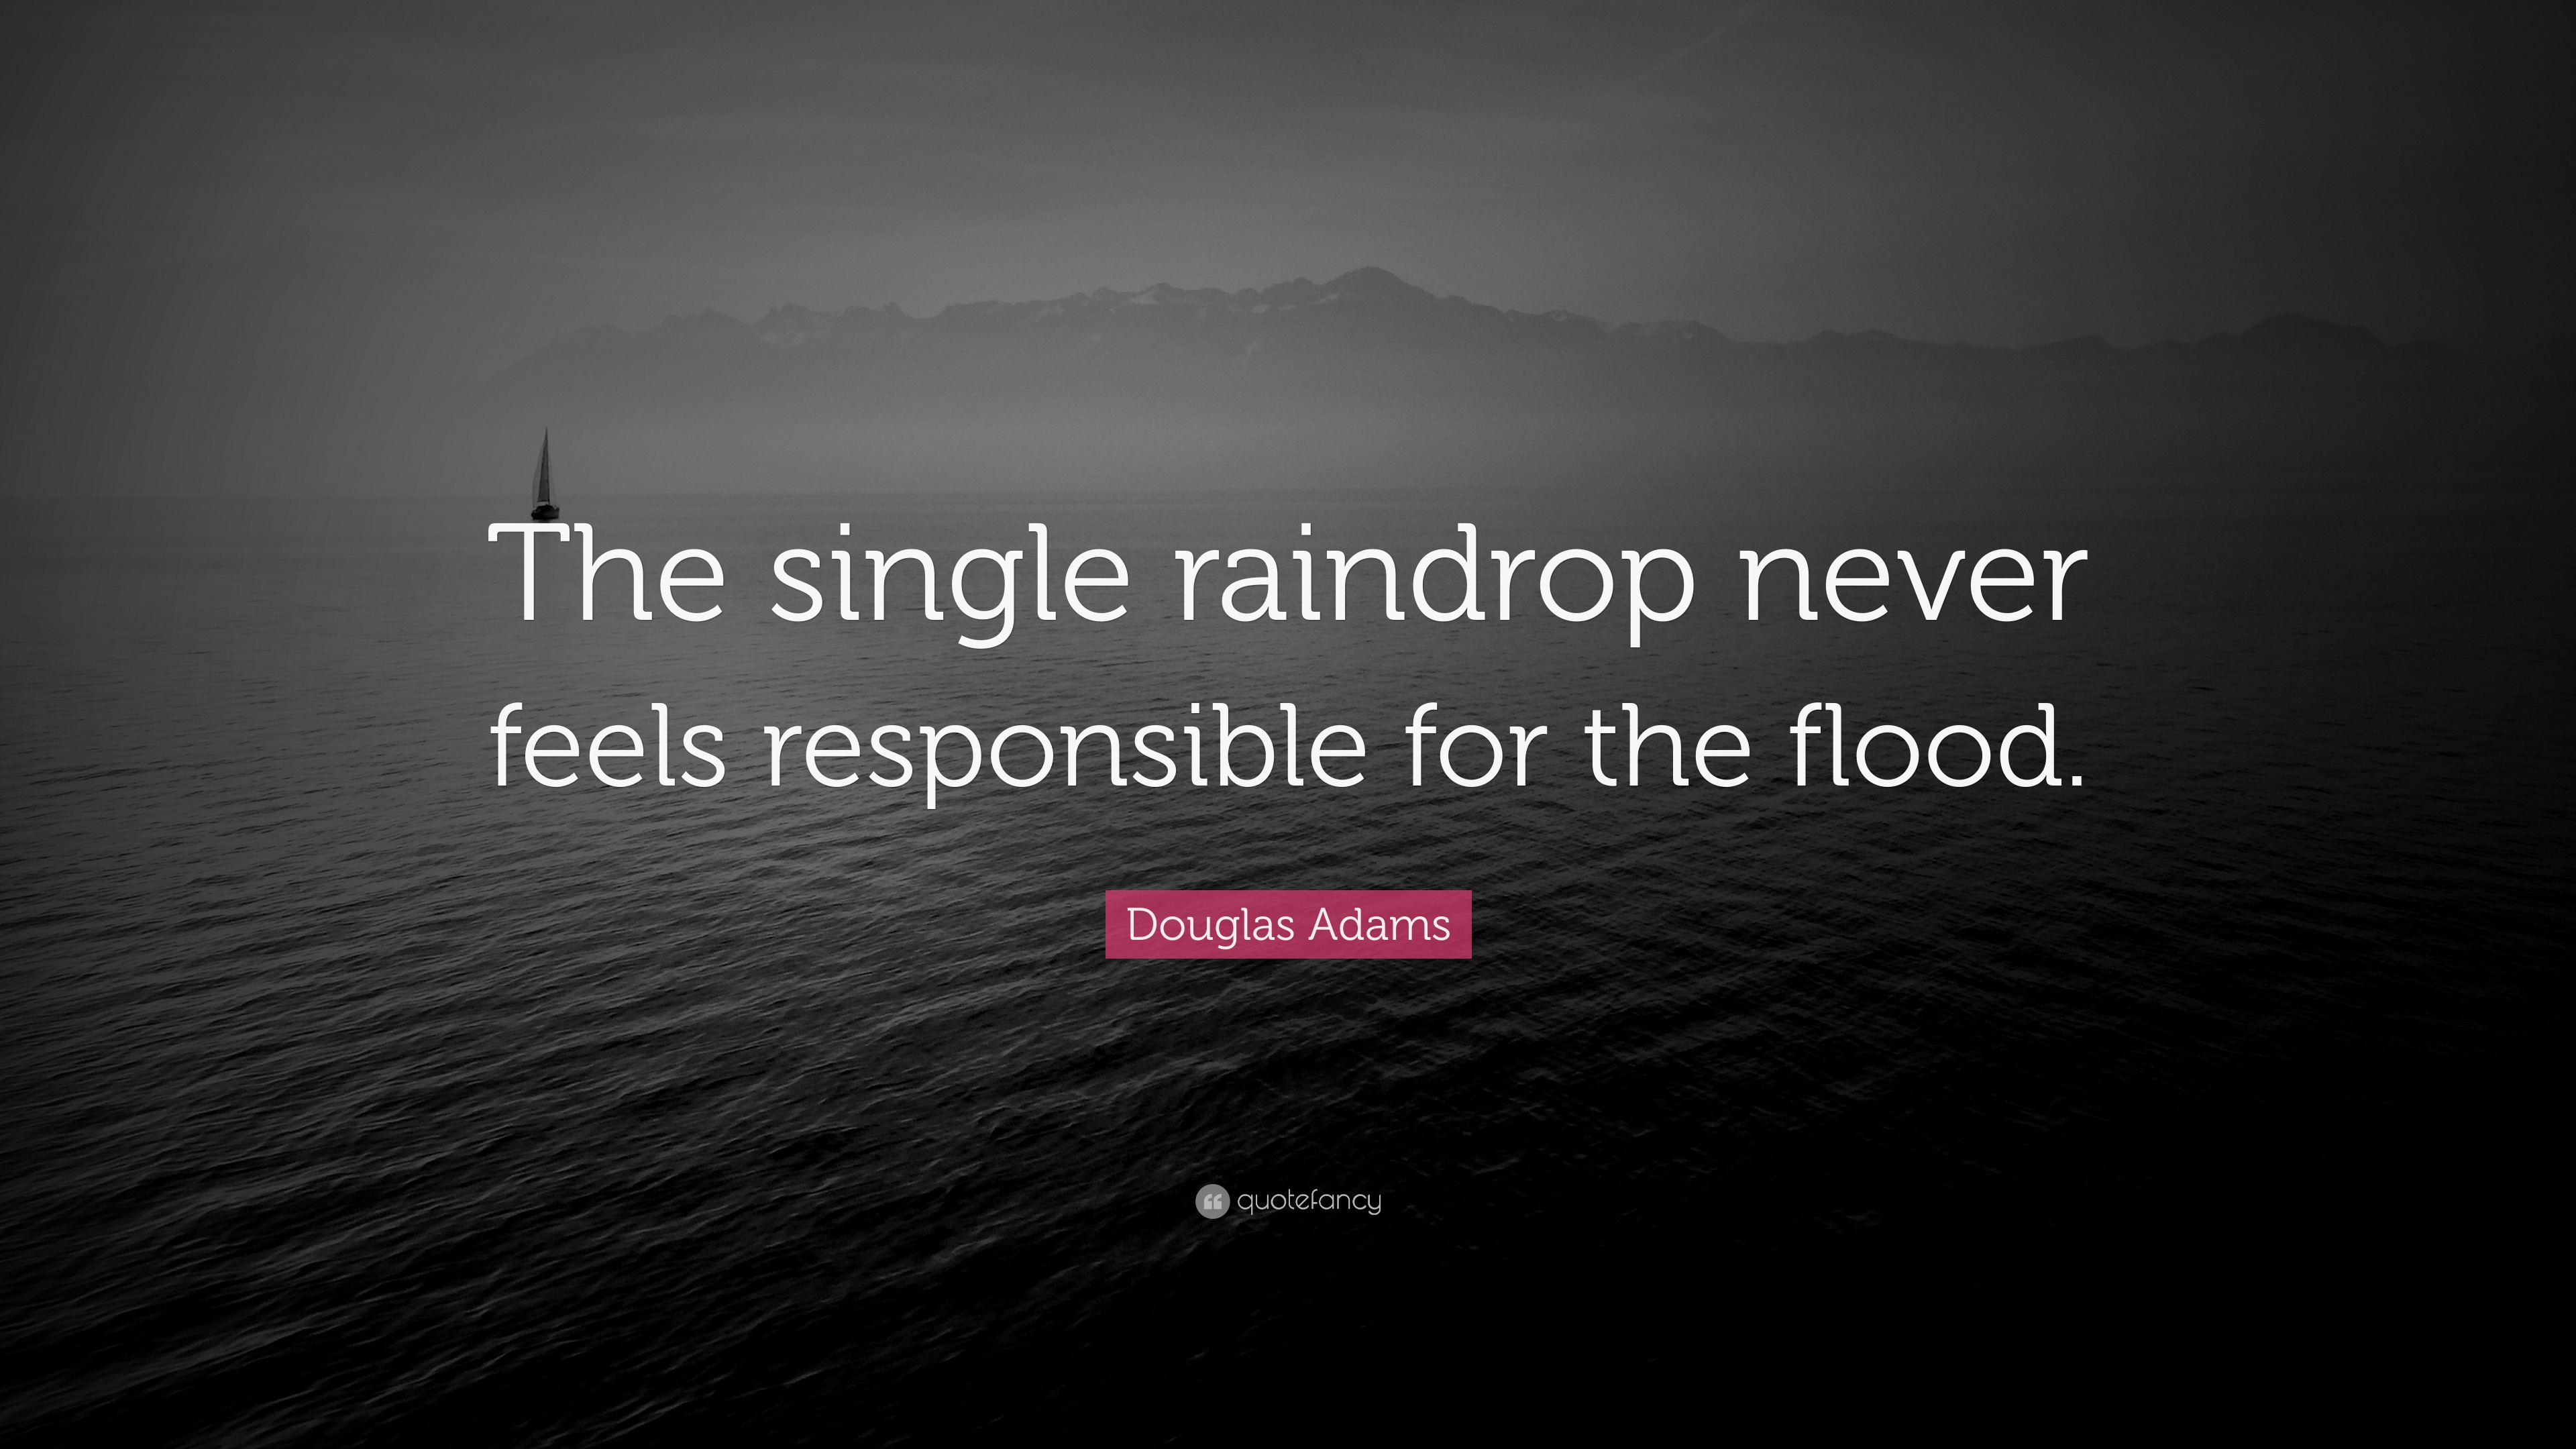 No single raindrop believes it is to blame for the flood